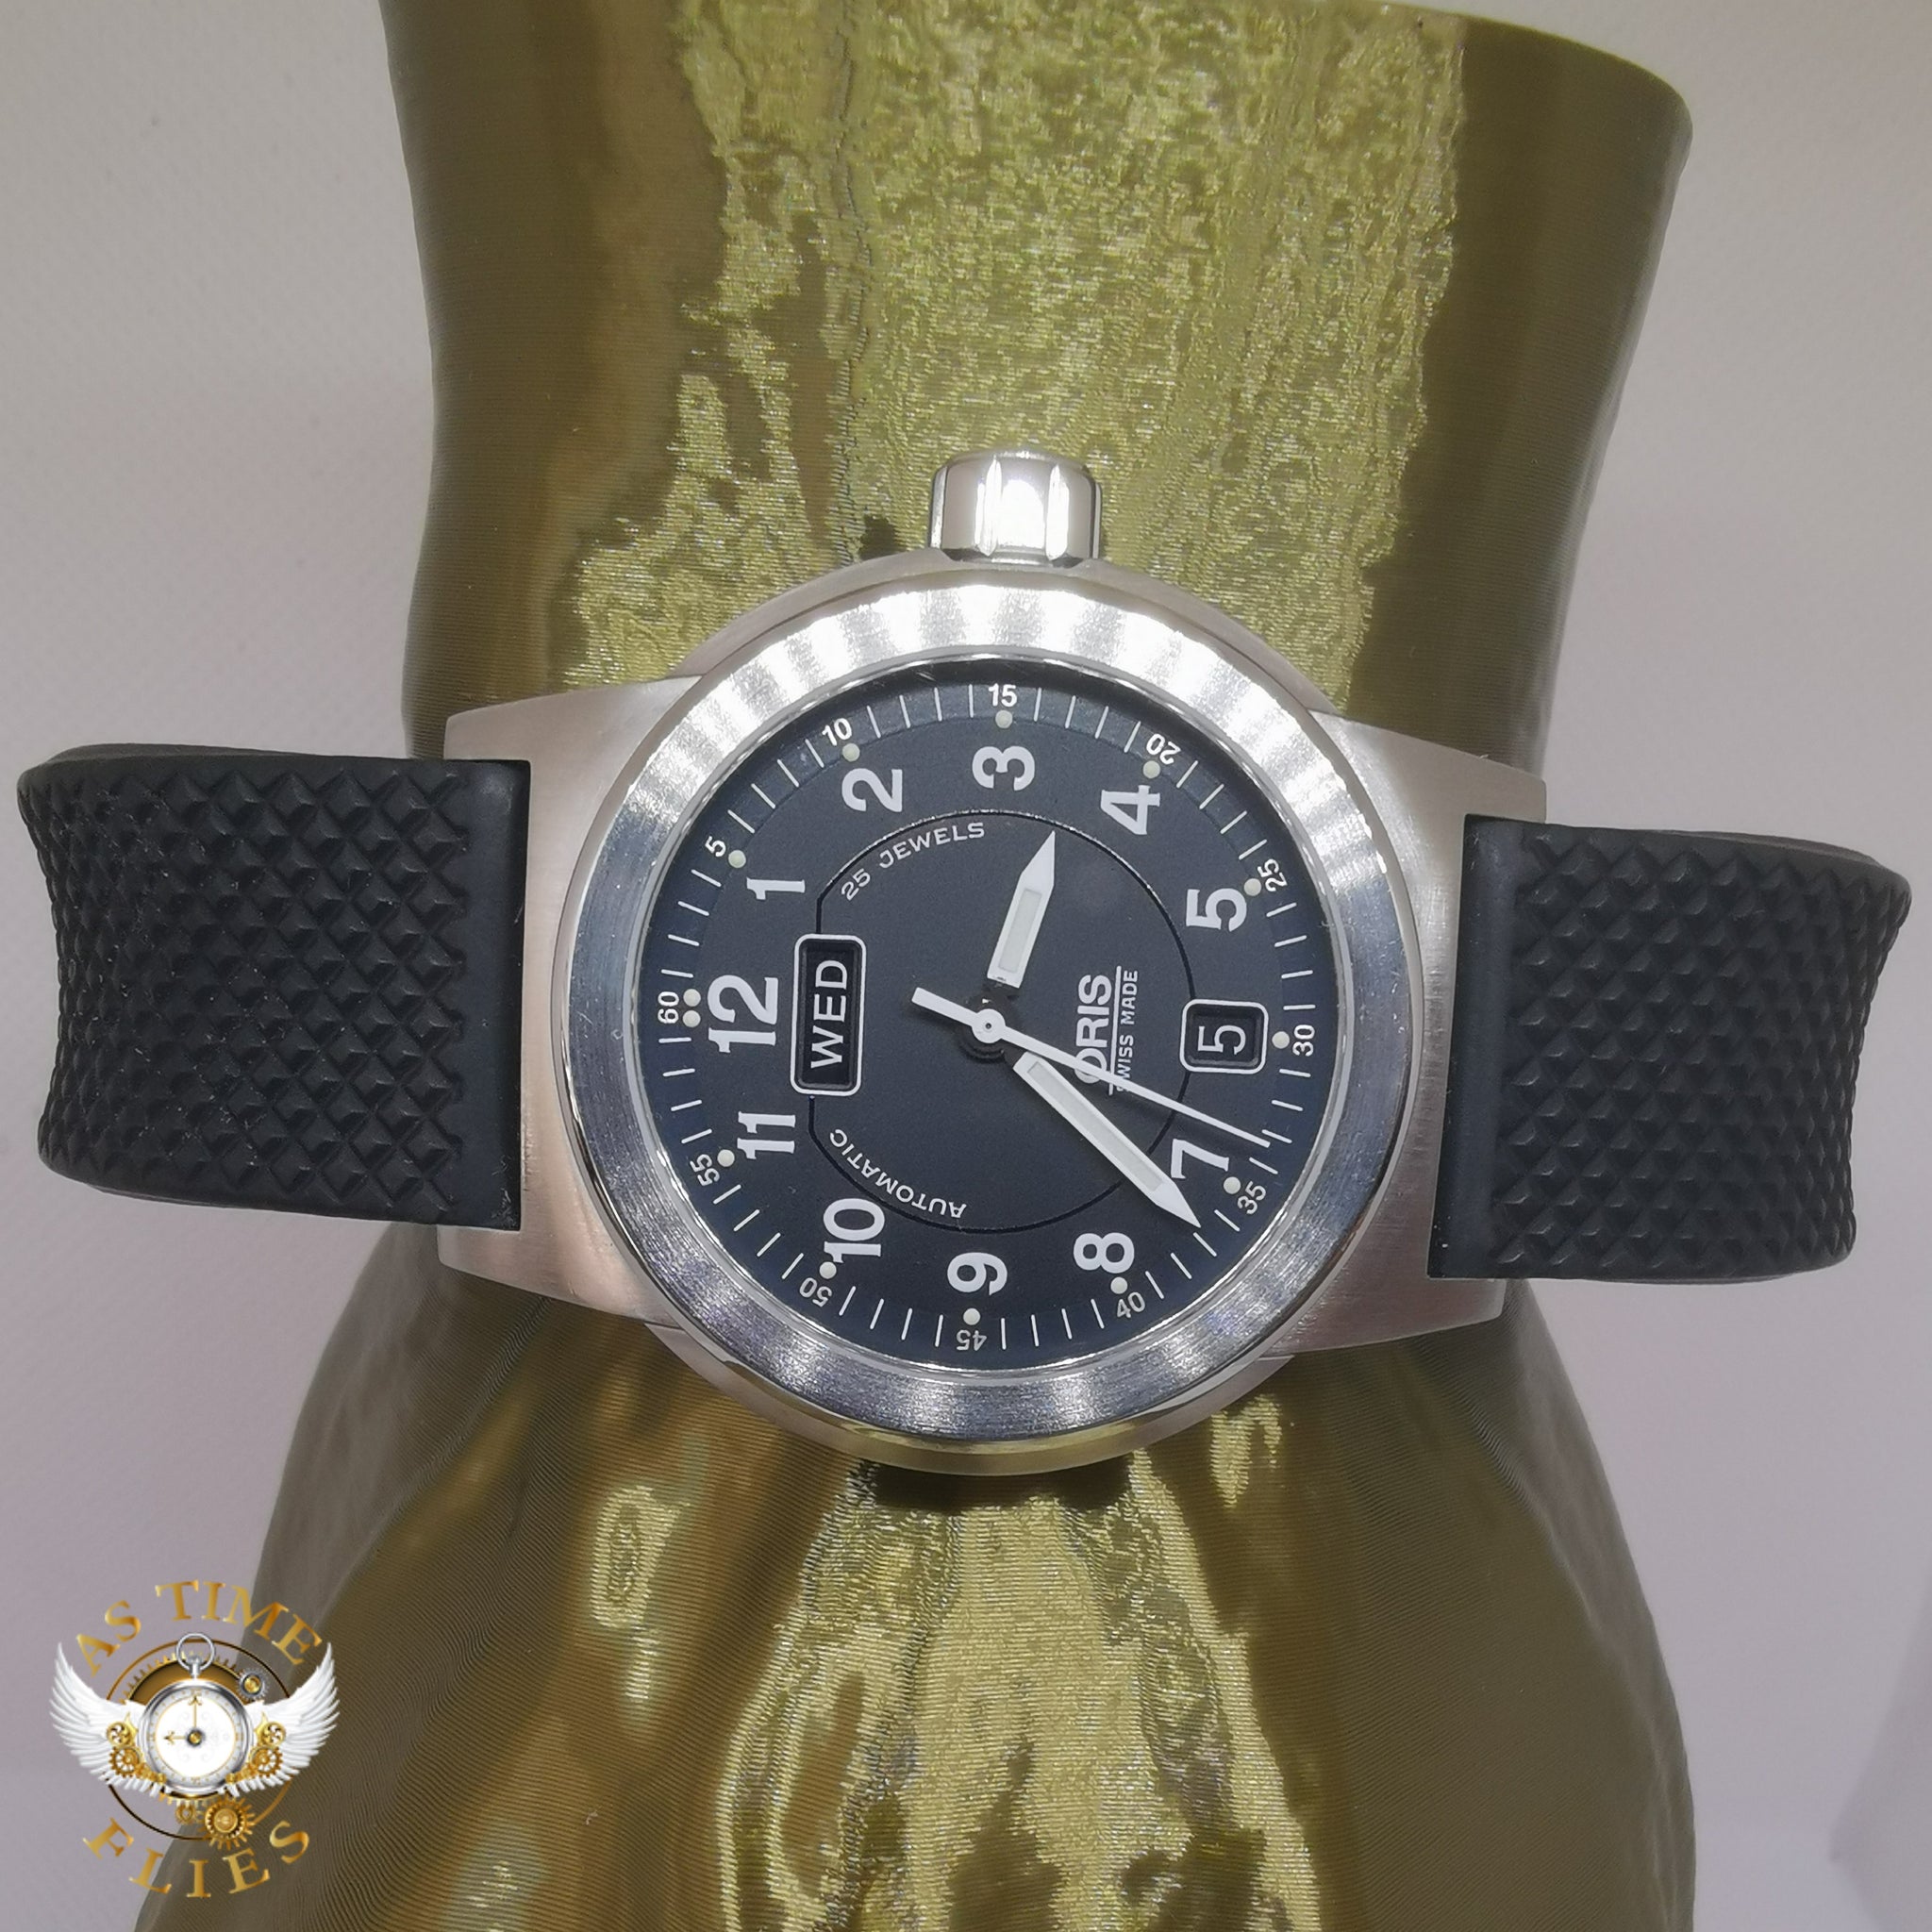 Oris BC3 7500 "Big Crown" Day-Date Ref. 63575004164rs